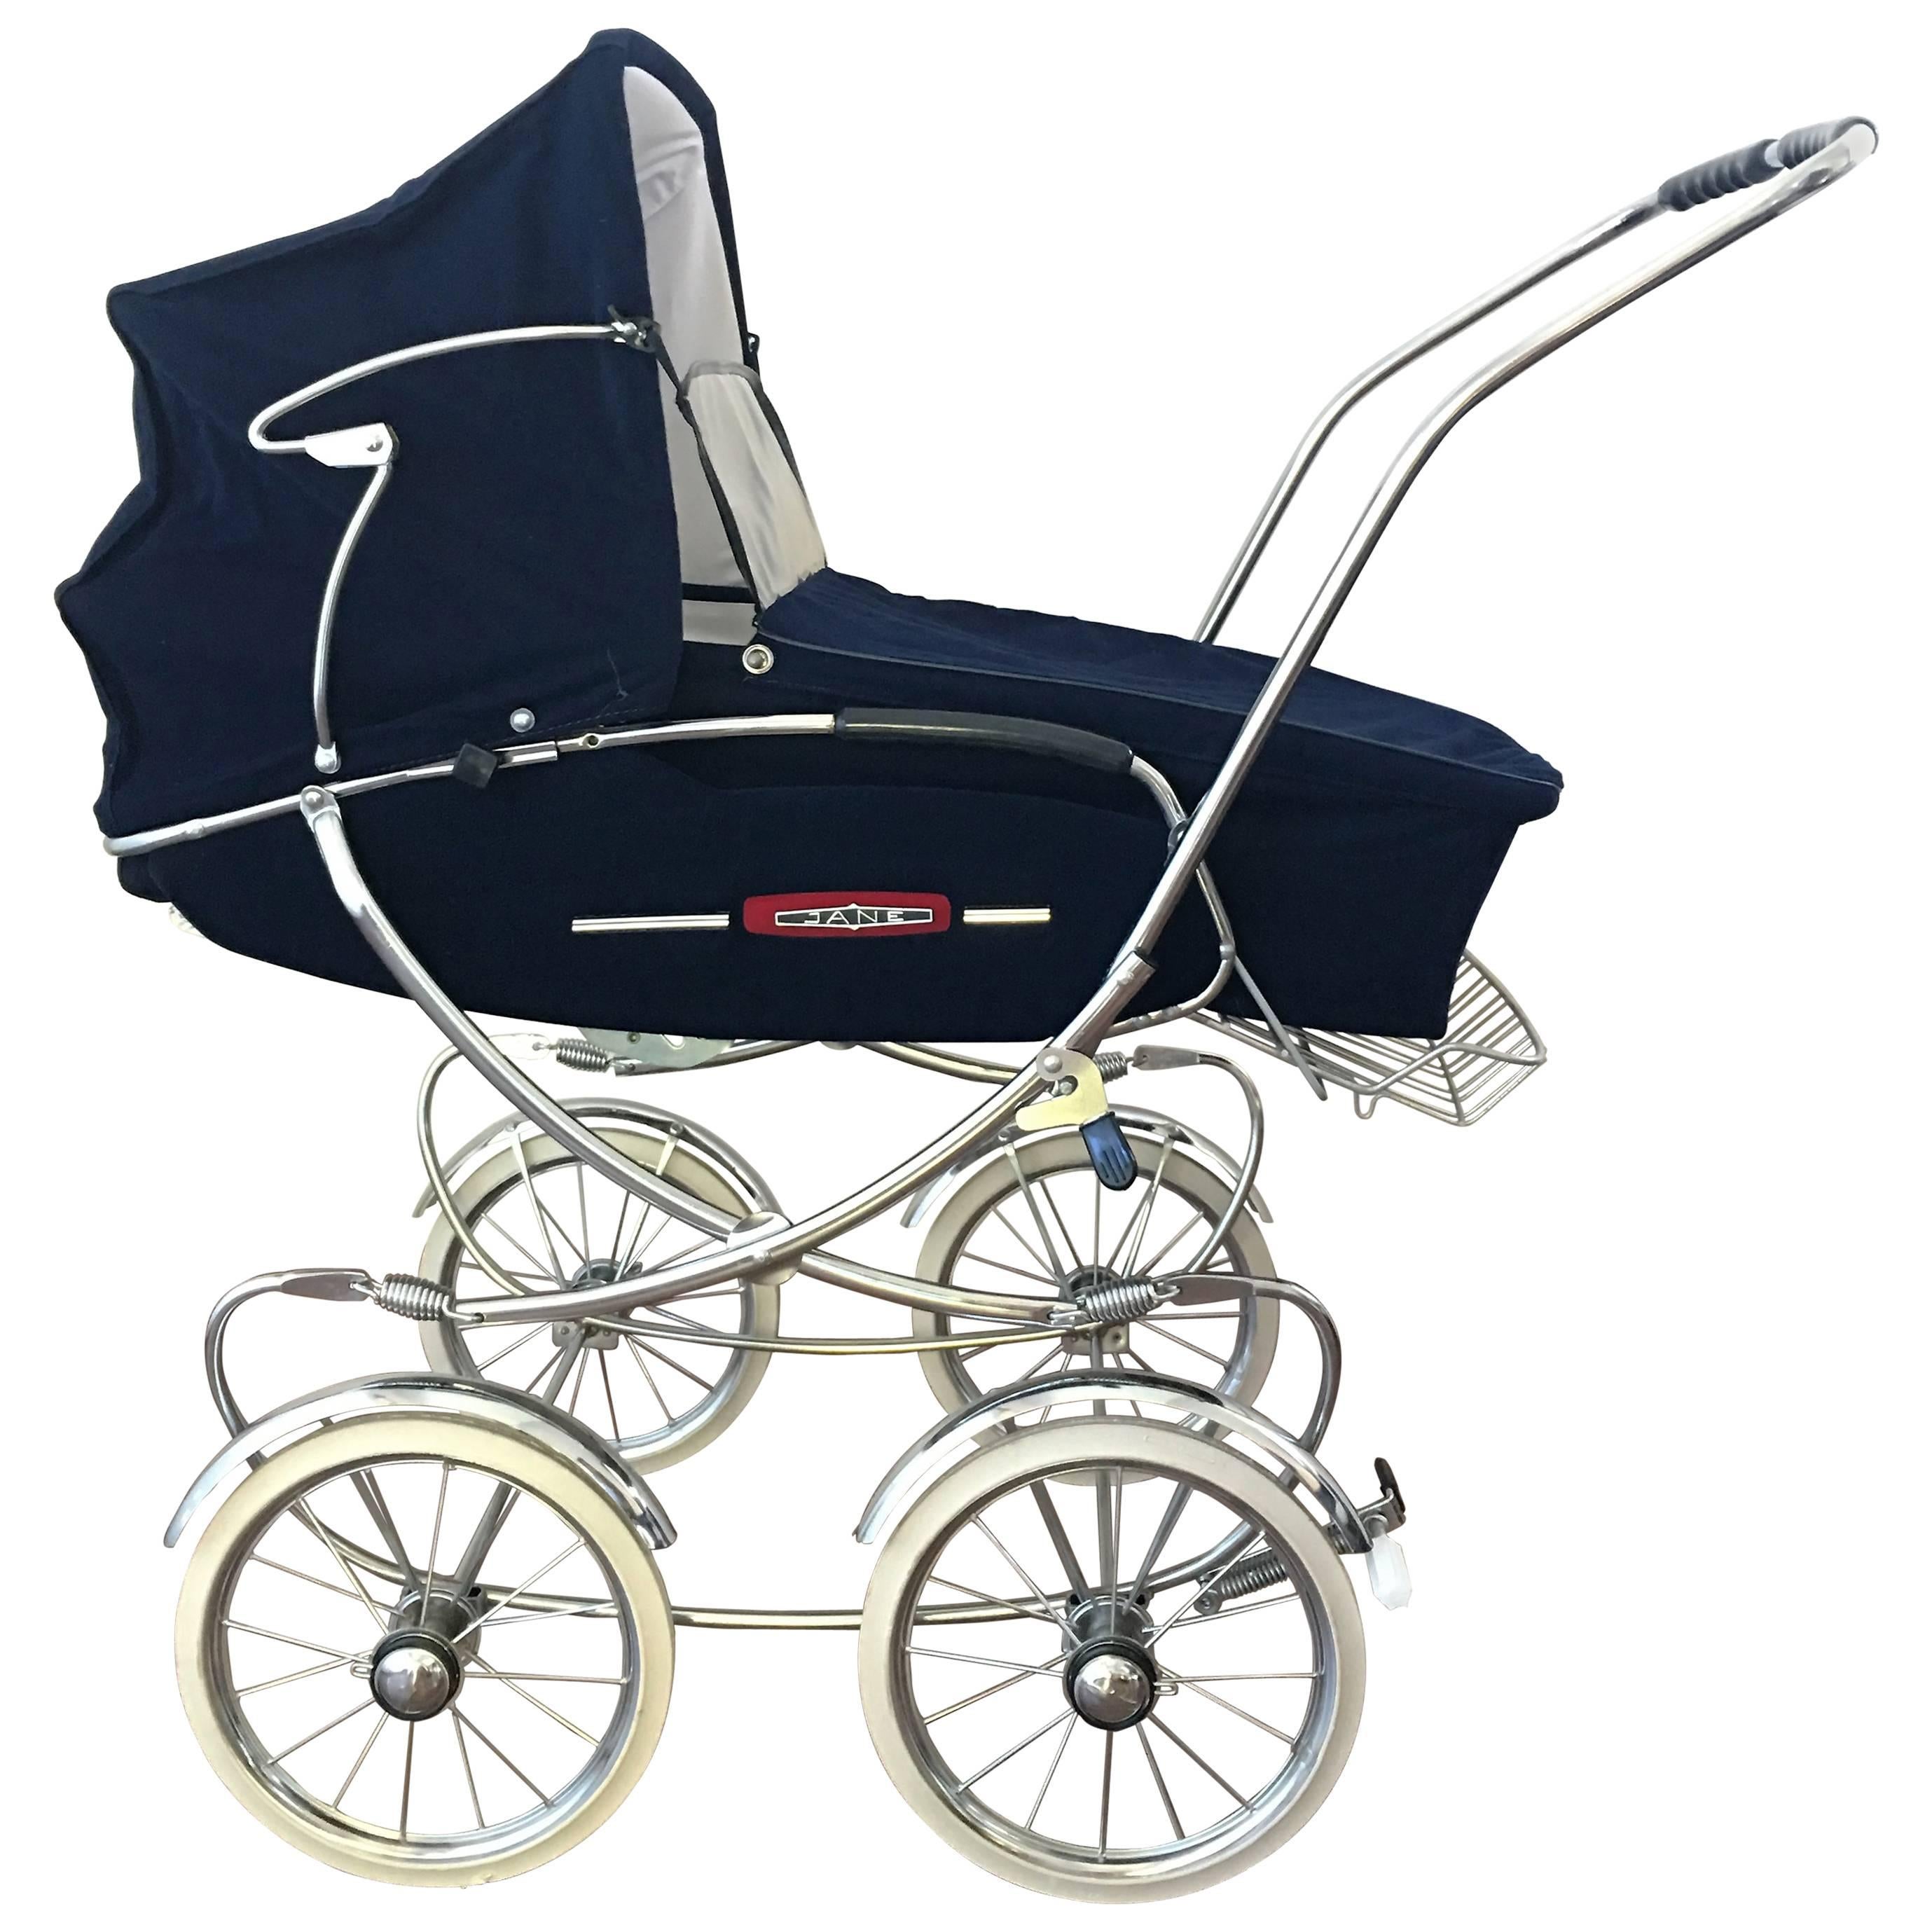 20th Century Fancy Convertible Baby Carriage, Baby Stroller